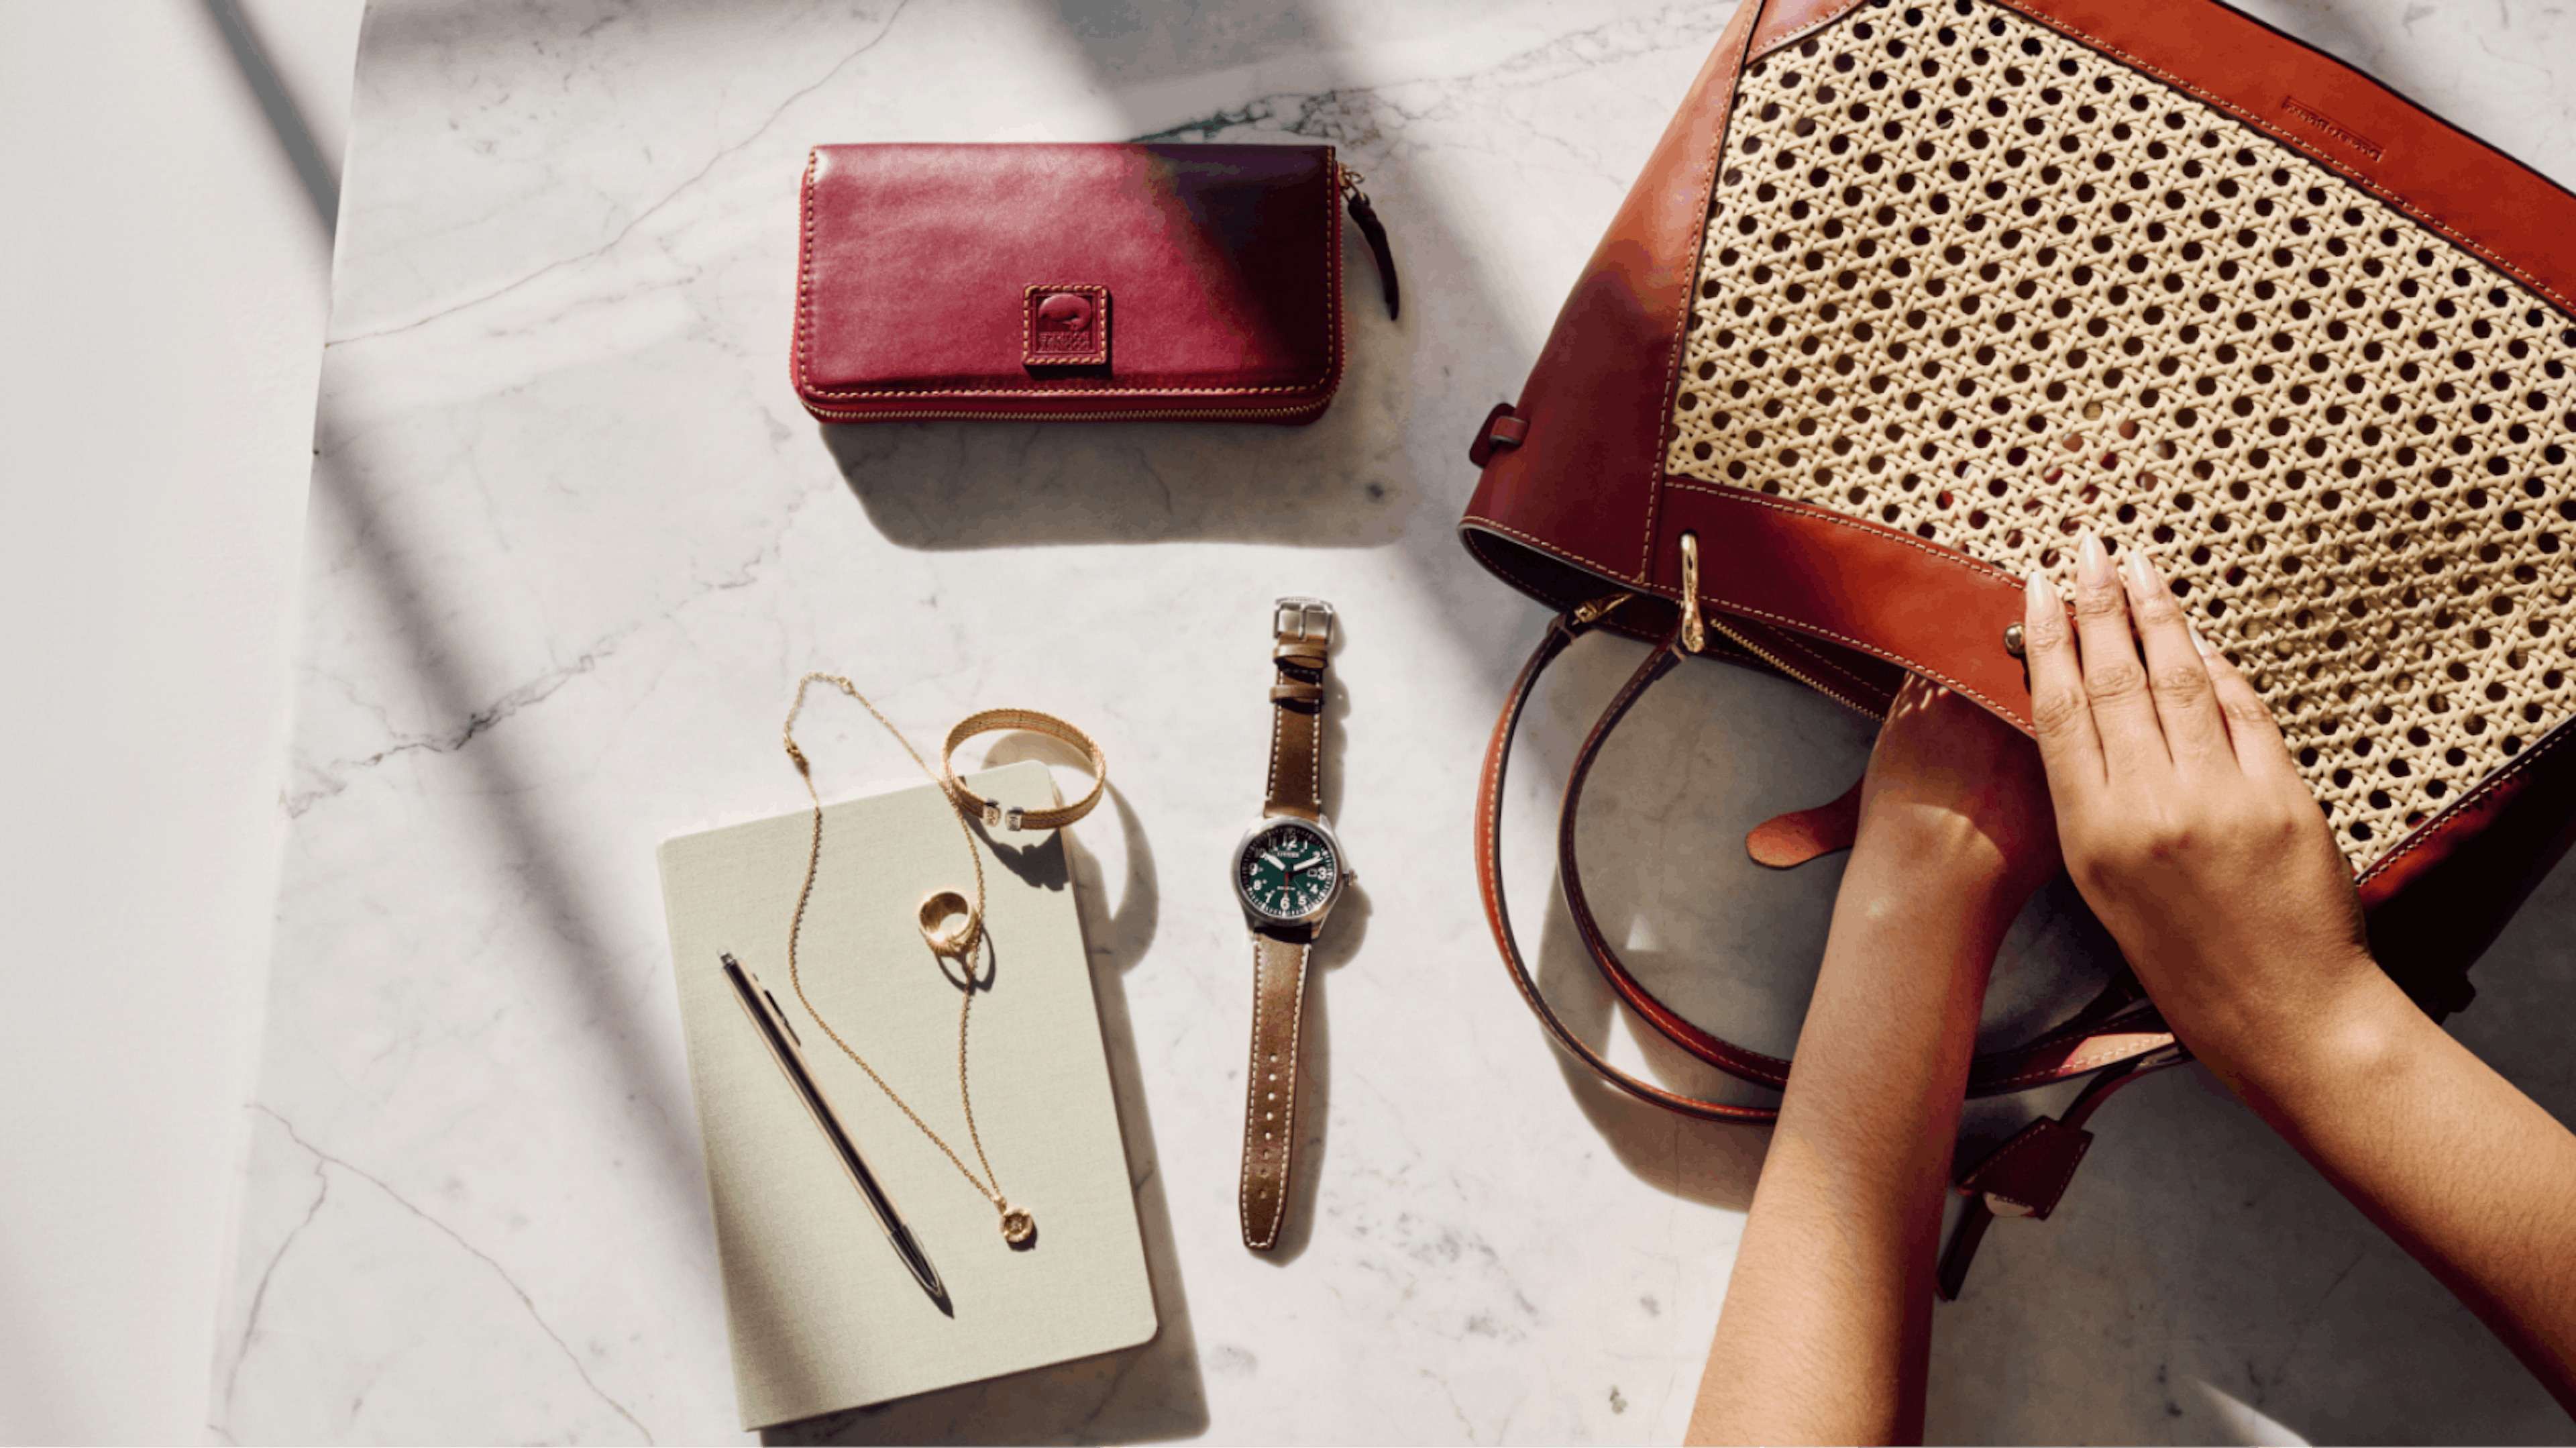 A neatly arranged collection of items is displayed on a marble surface. It includes a red leather wallet, a green-faced watch with a brown strap, a gold bracelet, a gold ring, a necklace, a notebook with a pen, and a woven handbag with leather trim. A pair of hands is seen reaching into the handbag.